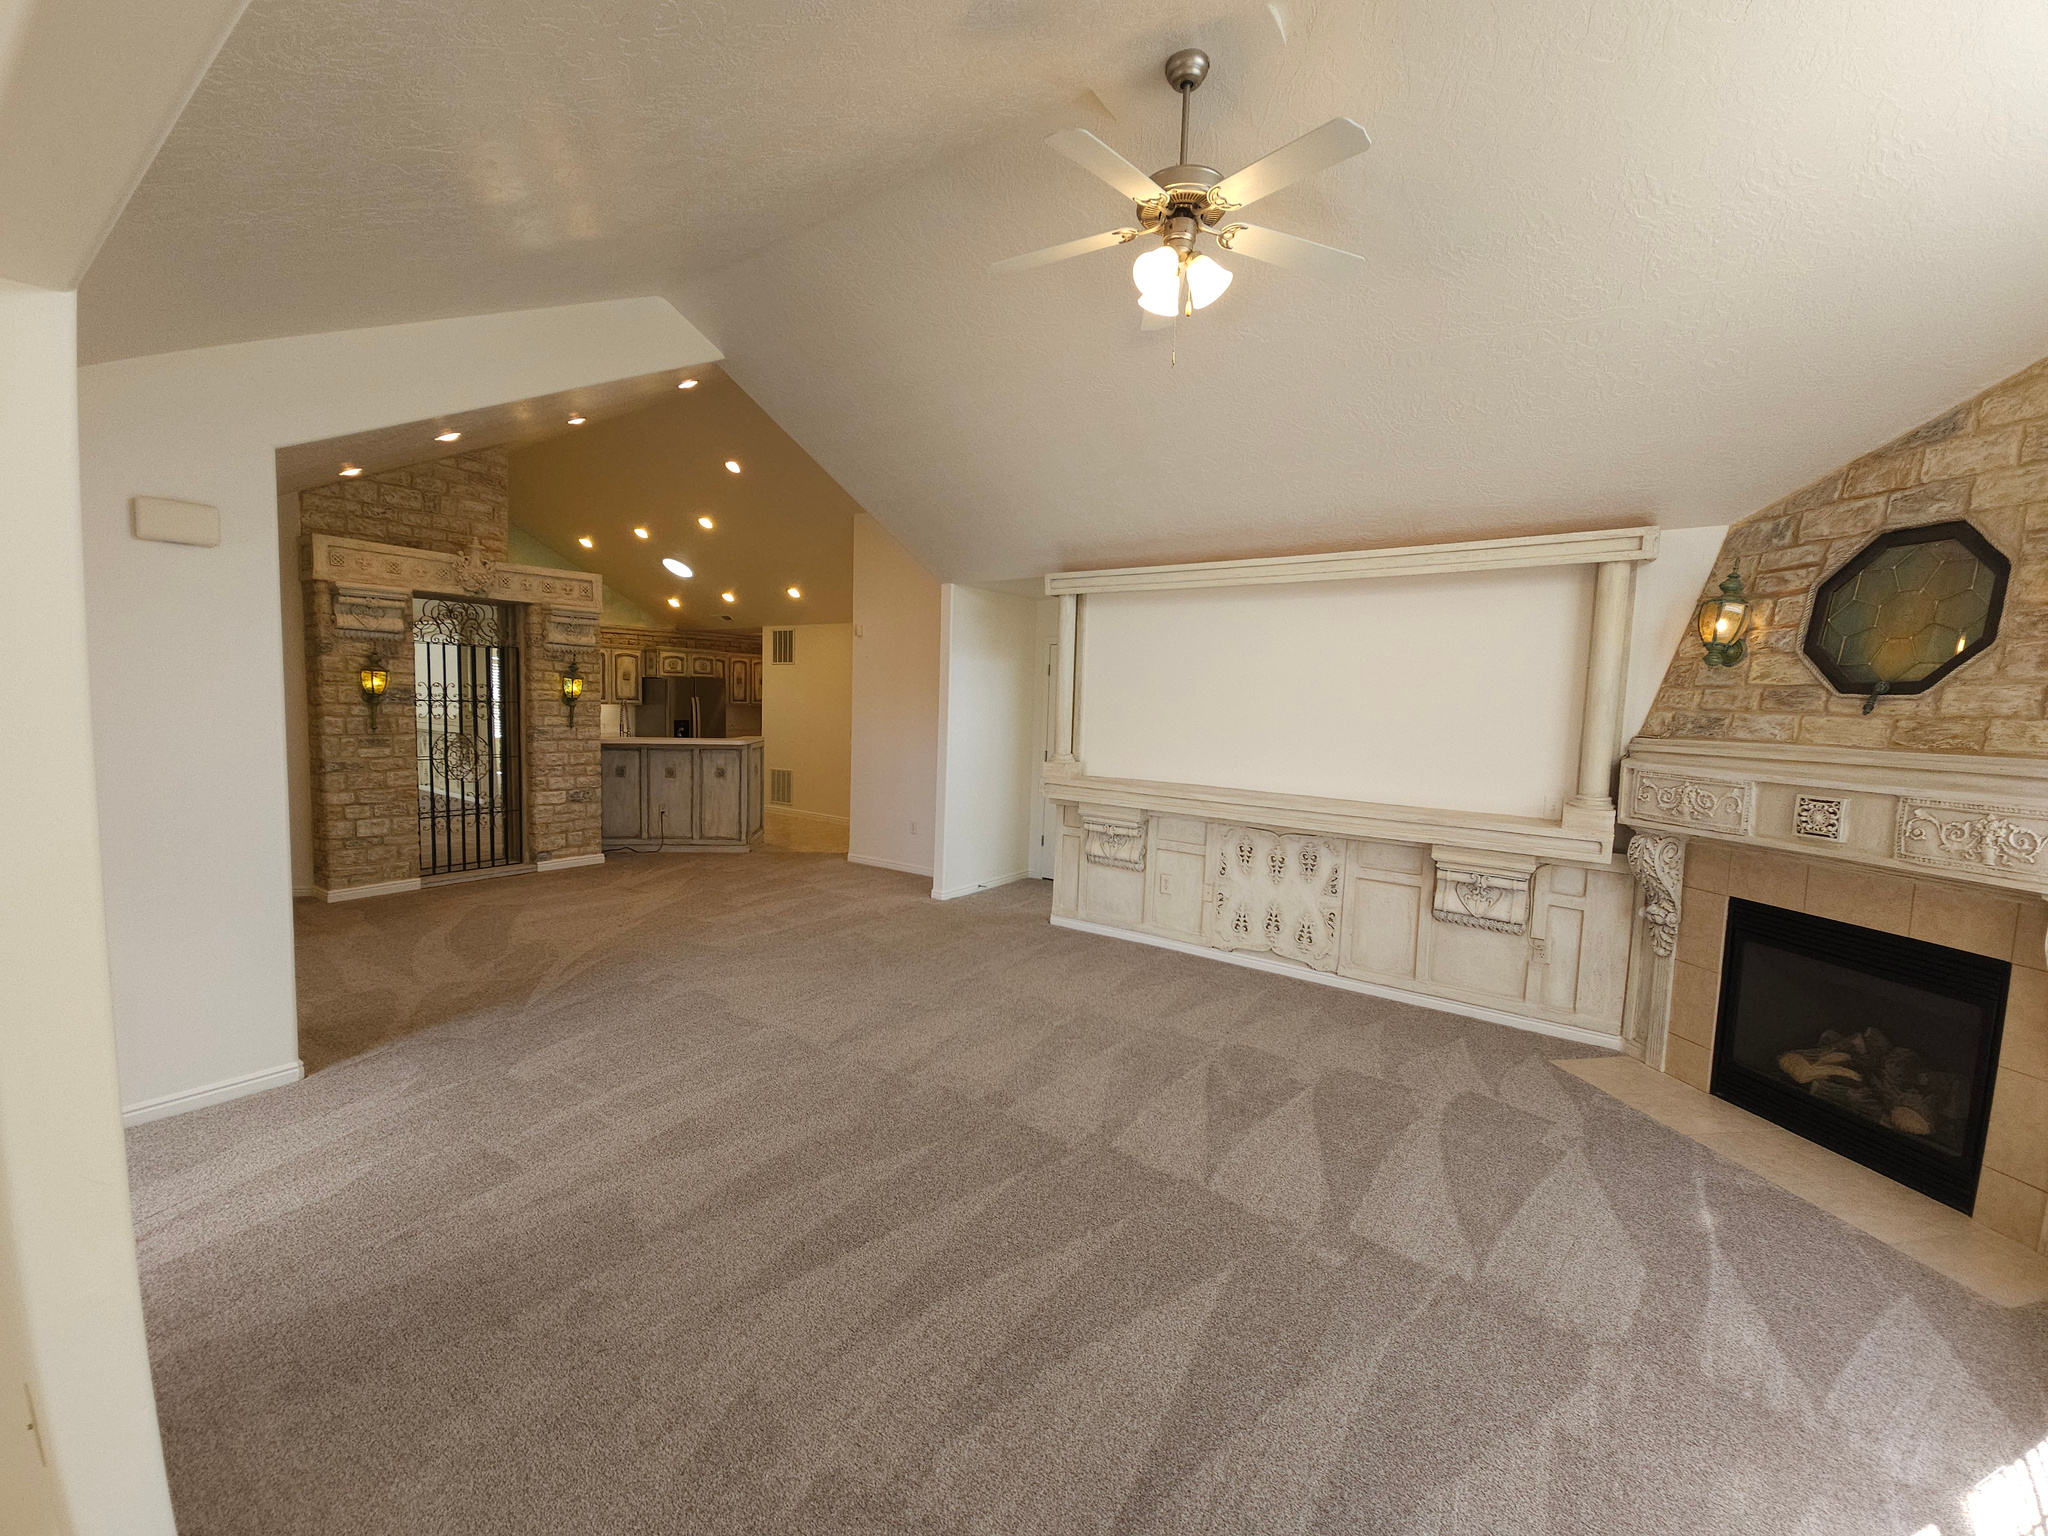 The spacious open floorplan lets you take in more of the drama all at once!